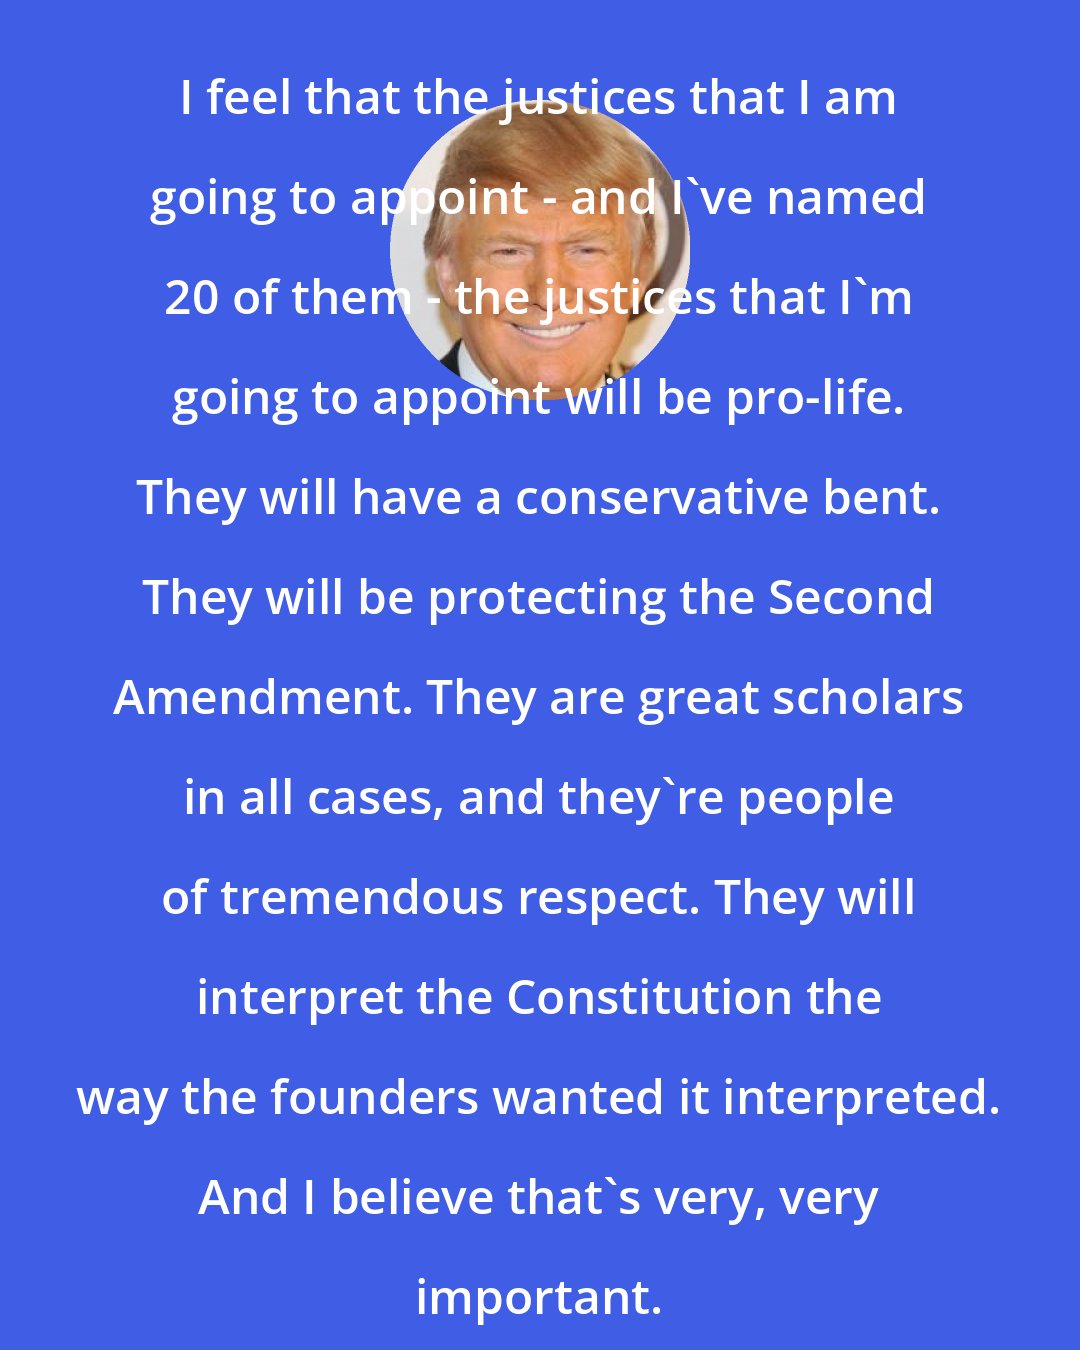 Donald Trump: I feel that the justices that I am going to appoint - and I've named 20 of them - the justices that I'm going to appoint will be pro-life. They will have a conservative bent. They will be protecting the Second Amendment. They are great scholars in all cases, and they're people of tremendous respect. They will interpret the Constitution the way the founders wanted it interpreted. And I believe that's very, very important.